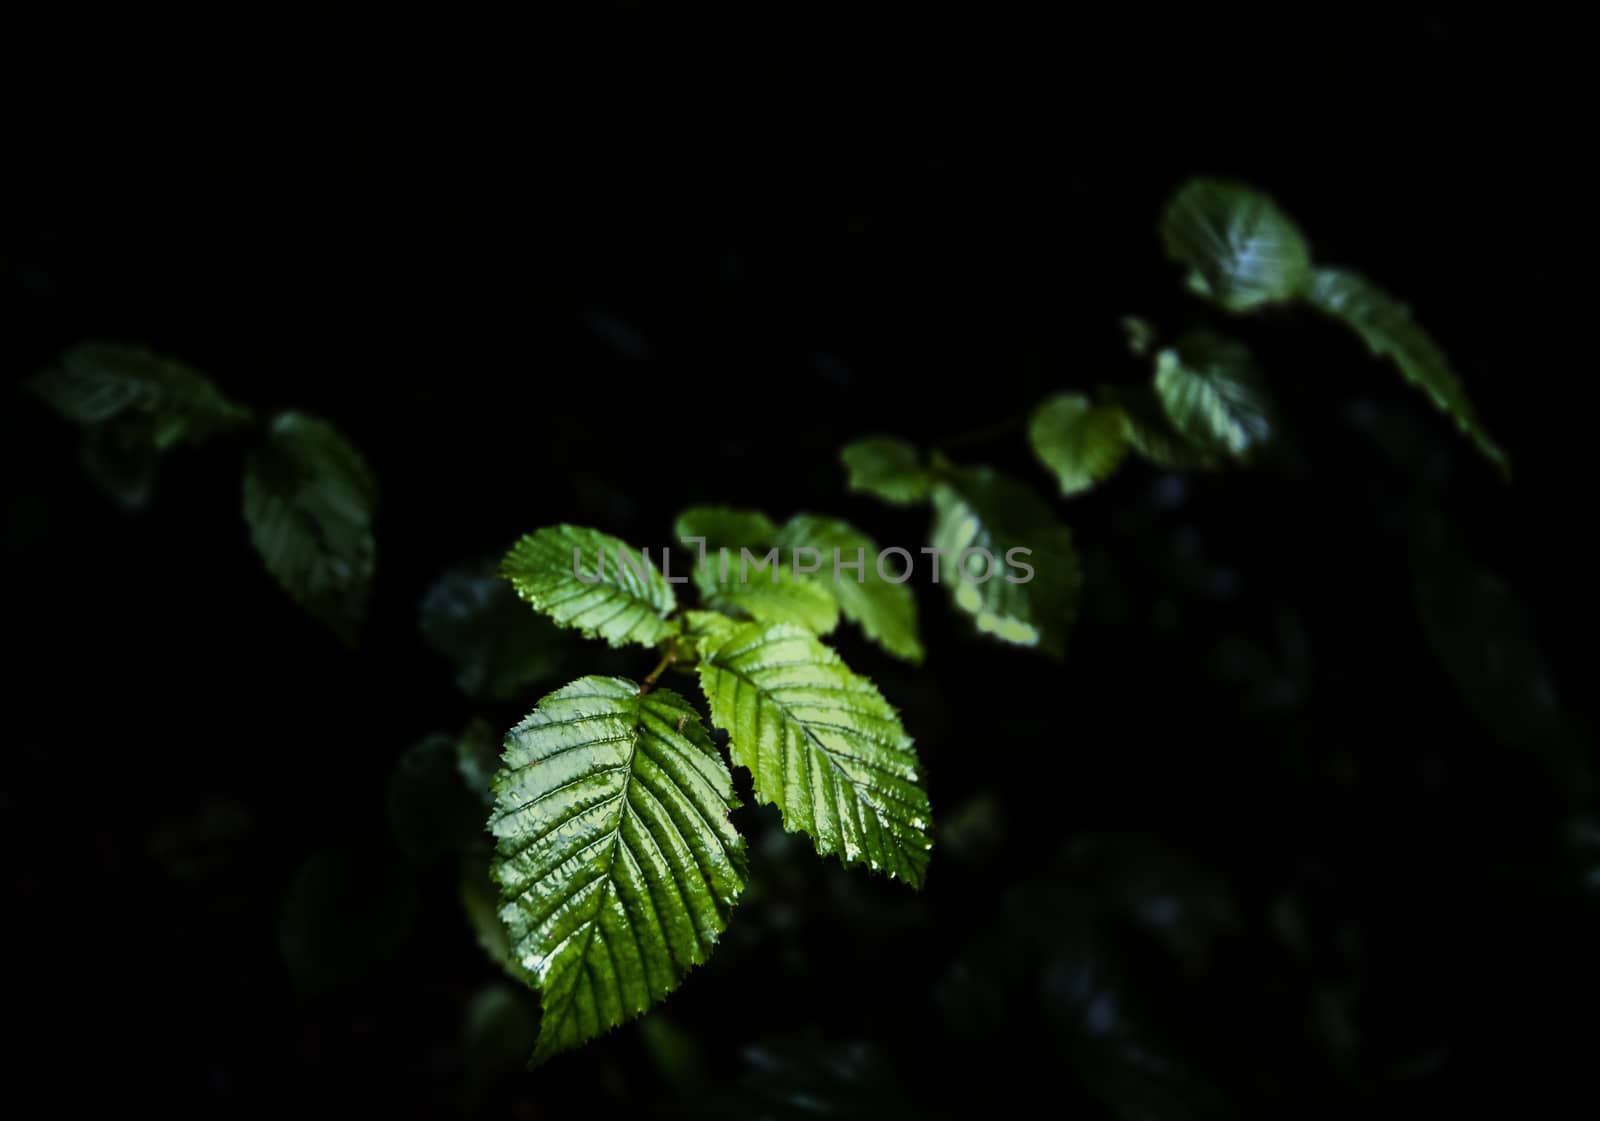 Dark green wet foliage after rain, leafs on branch, close up, selective focus, low key greenery on dark background